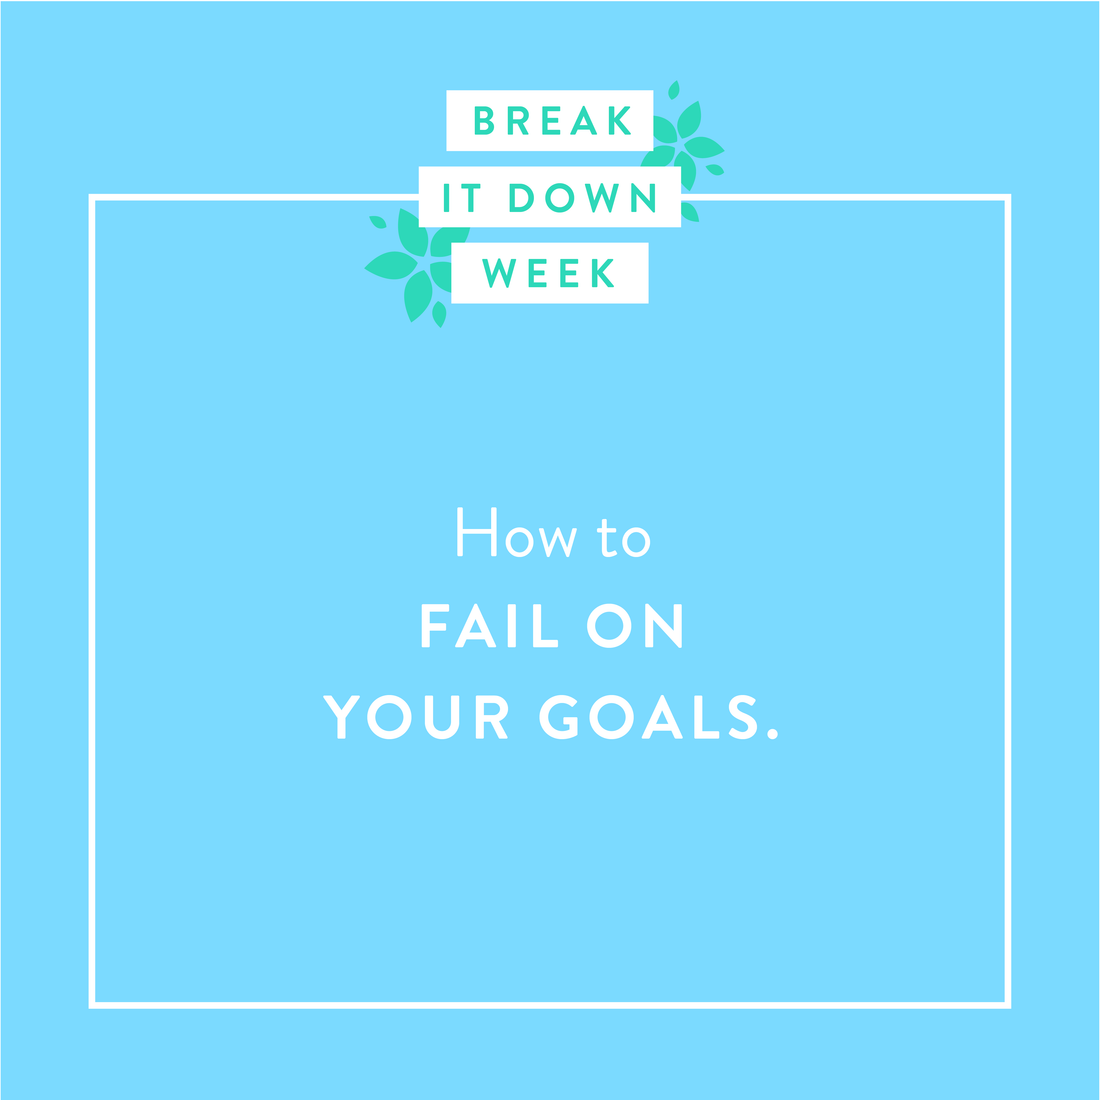 How to Fail on Your Goals